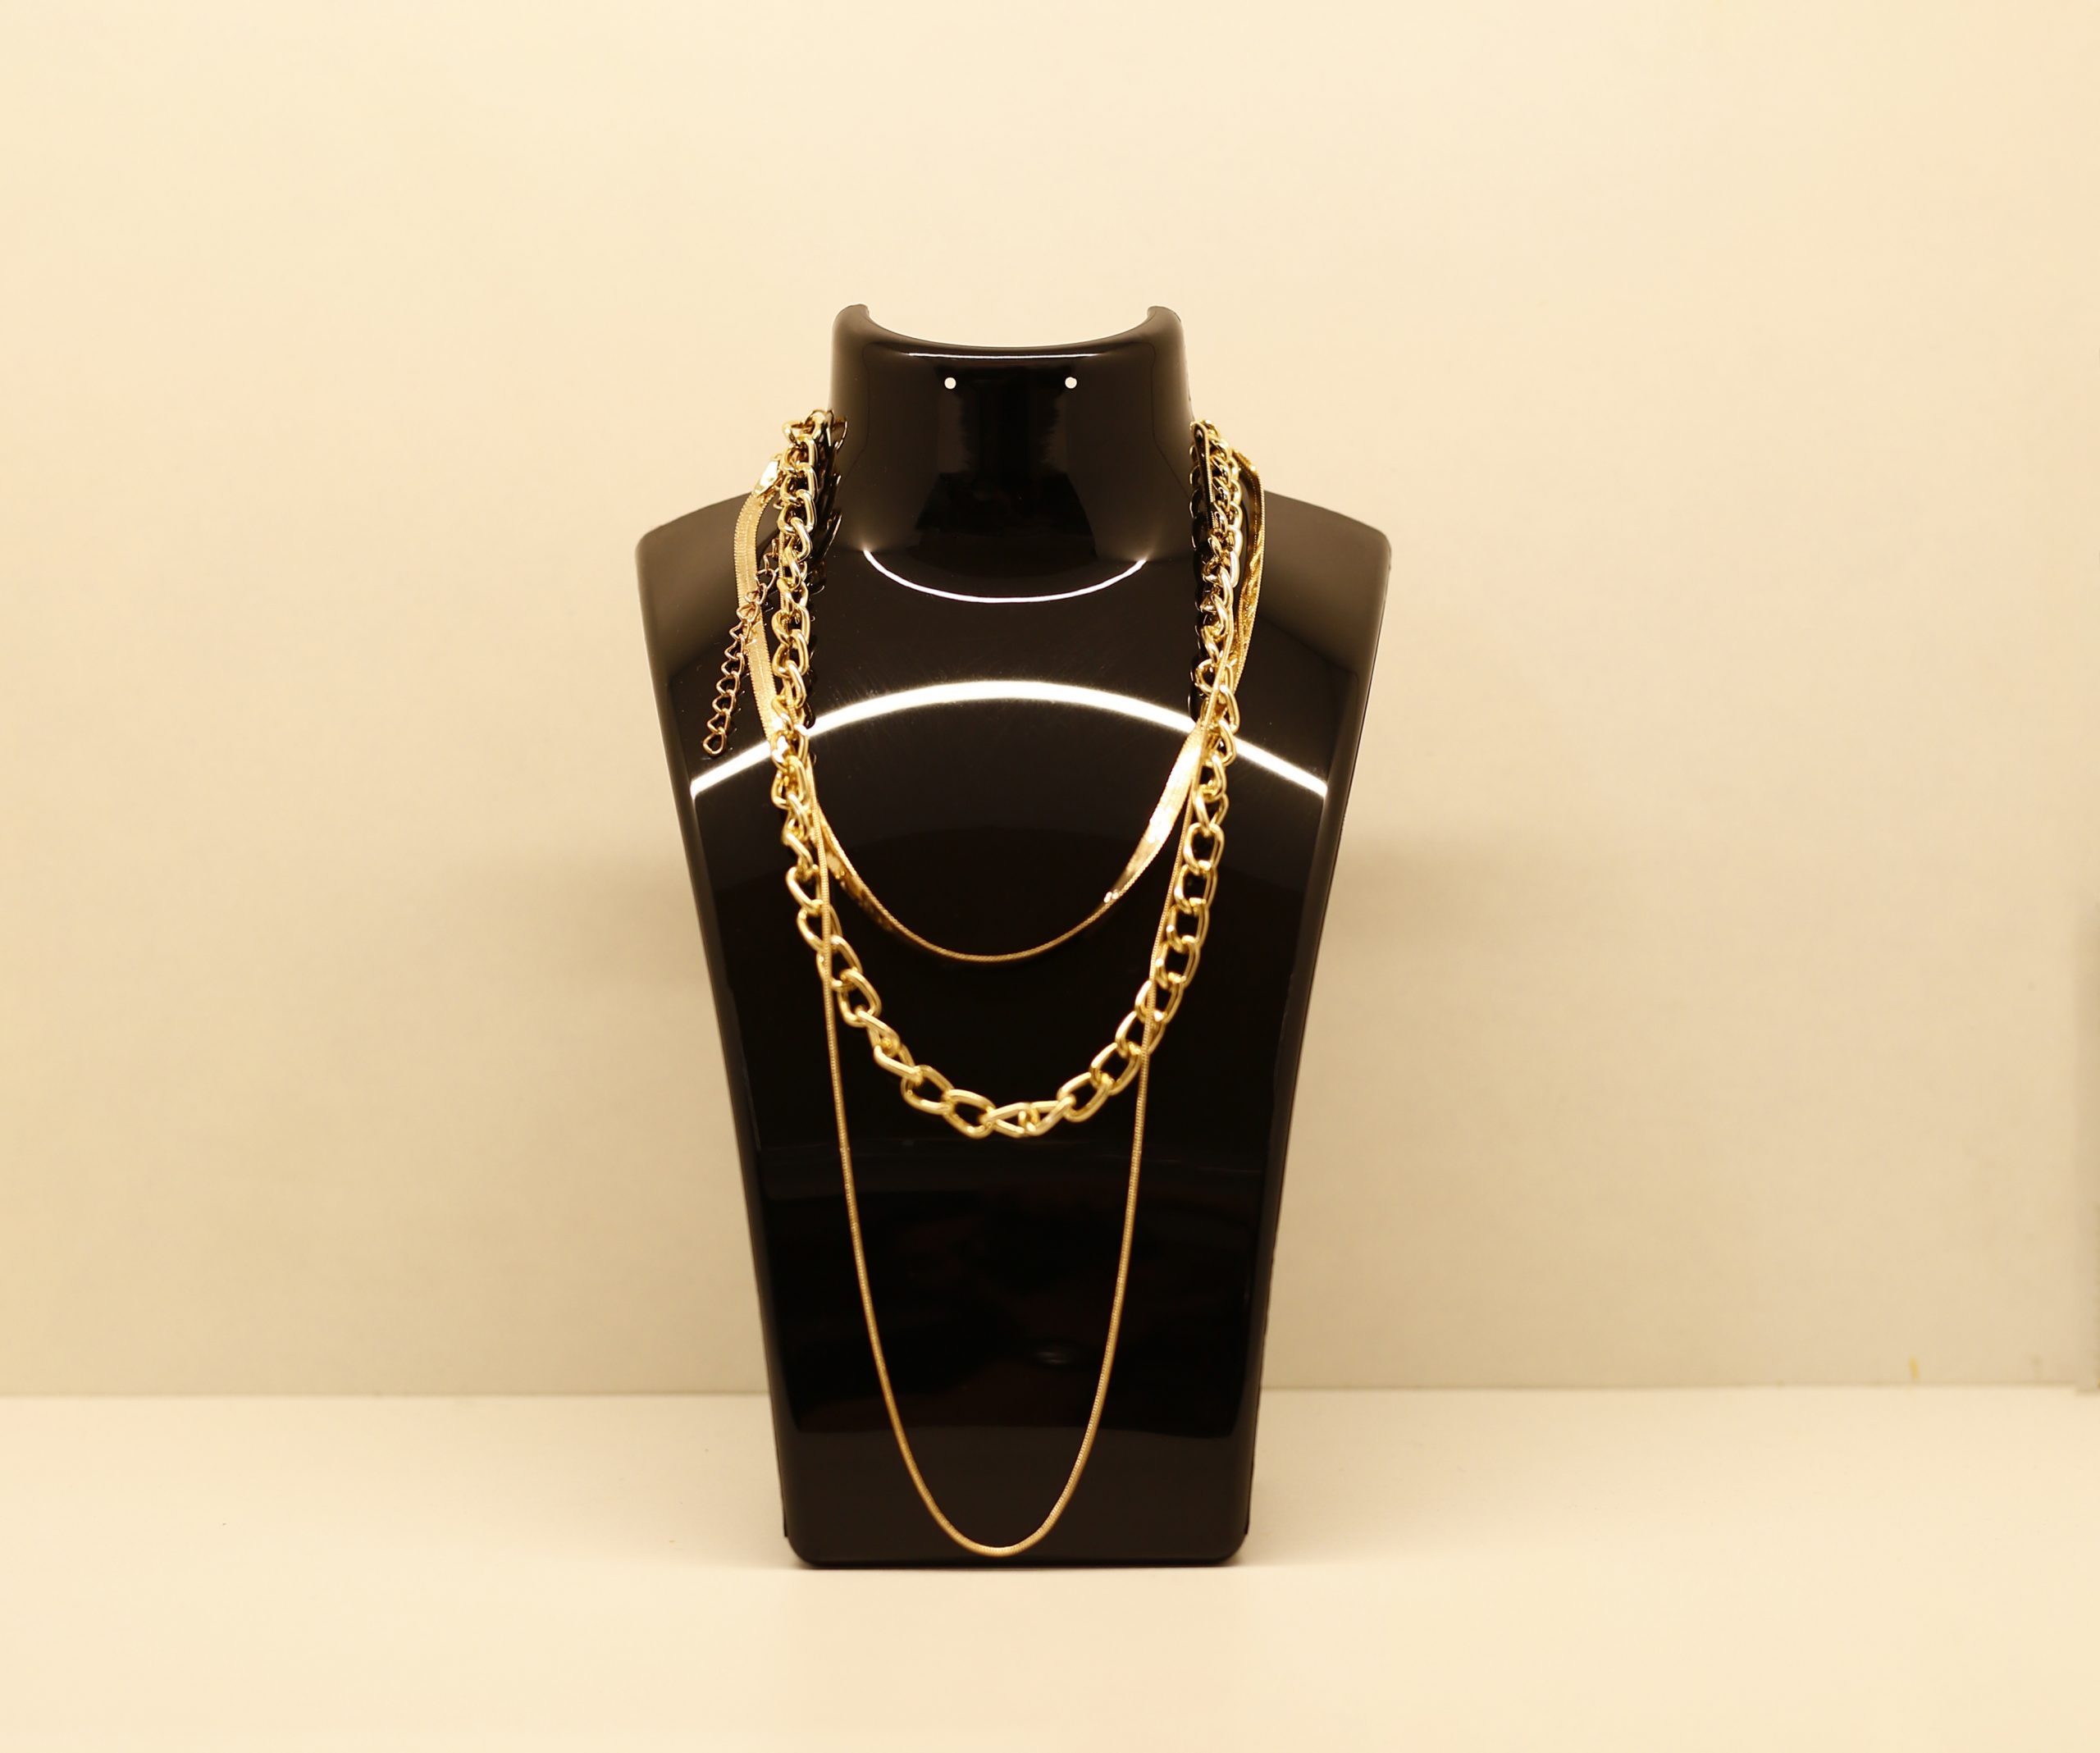 Redefine Street Fashion with Bold, Edgy, and Timeless So Icy’s Franco Chains